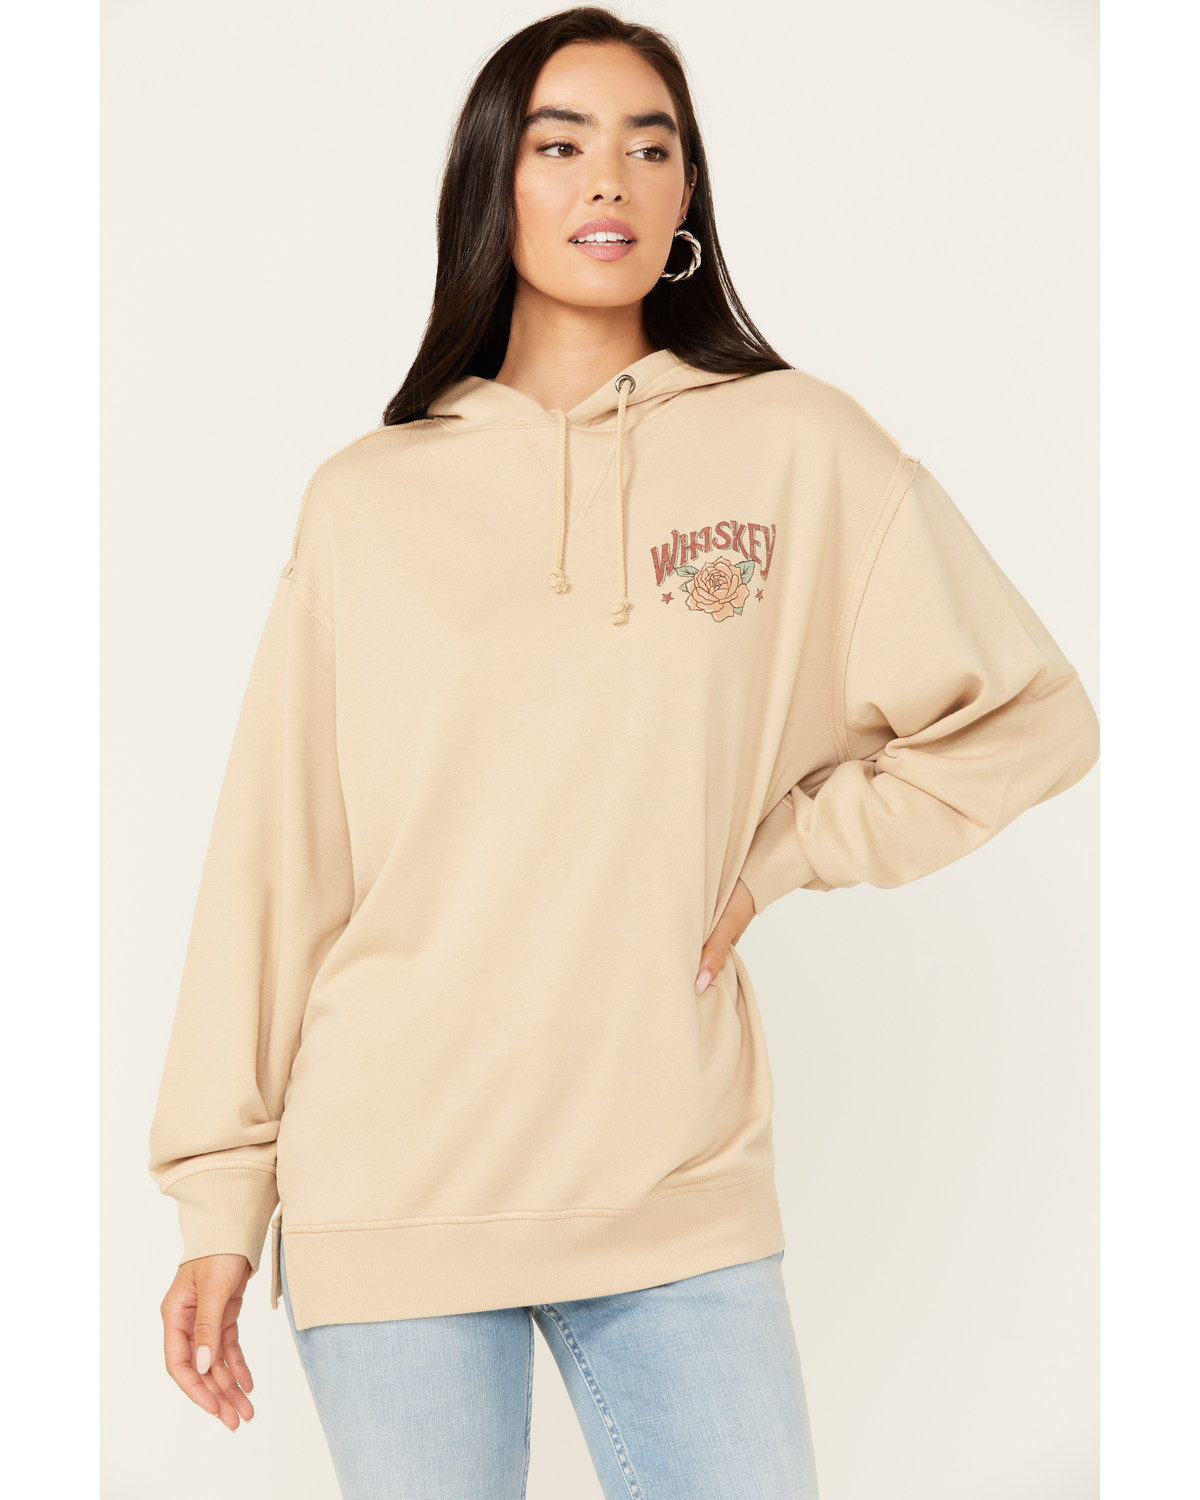 Cleo + Wolf Women's Whiskey Washed Oversized Hoodie